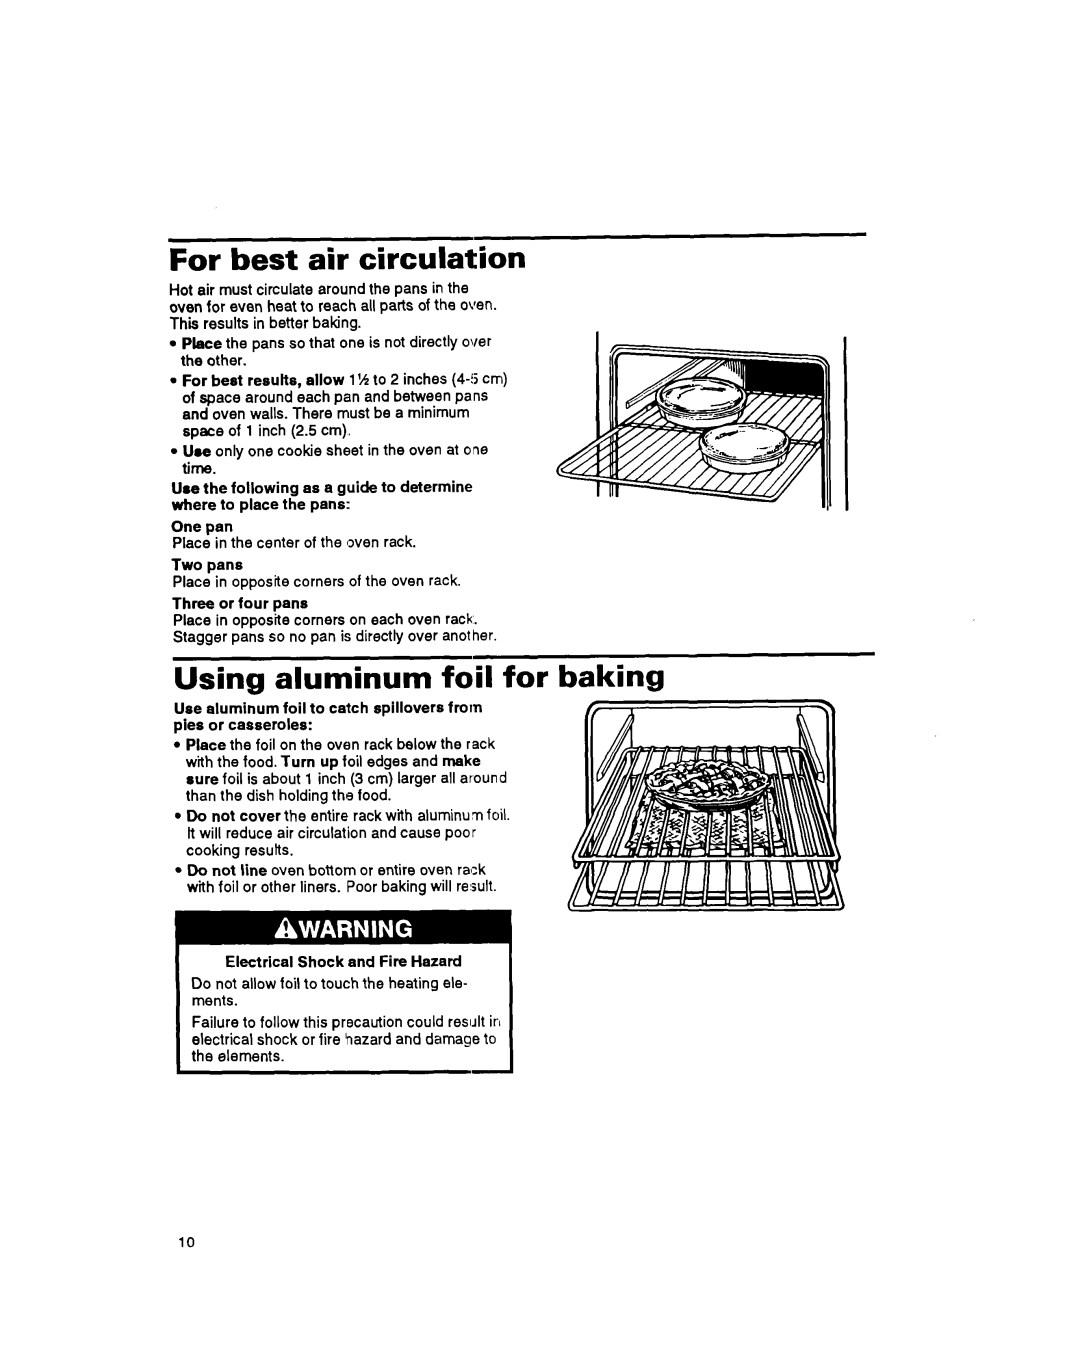 Whirlpool RS600BXB manual For best air circulation, Using aluminum foil for baking 